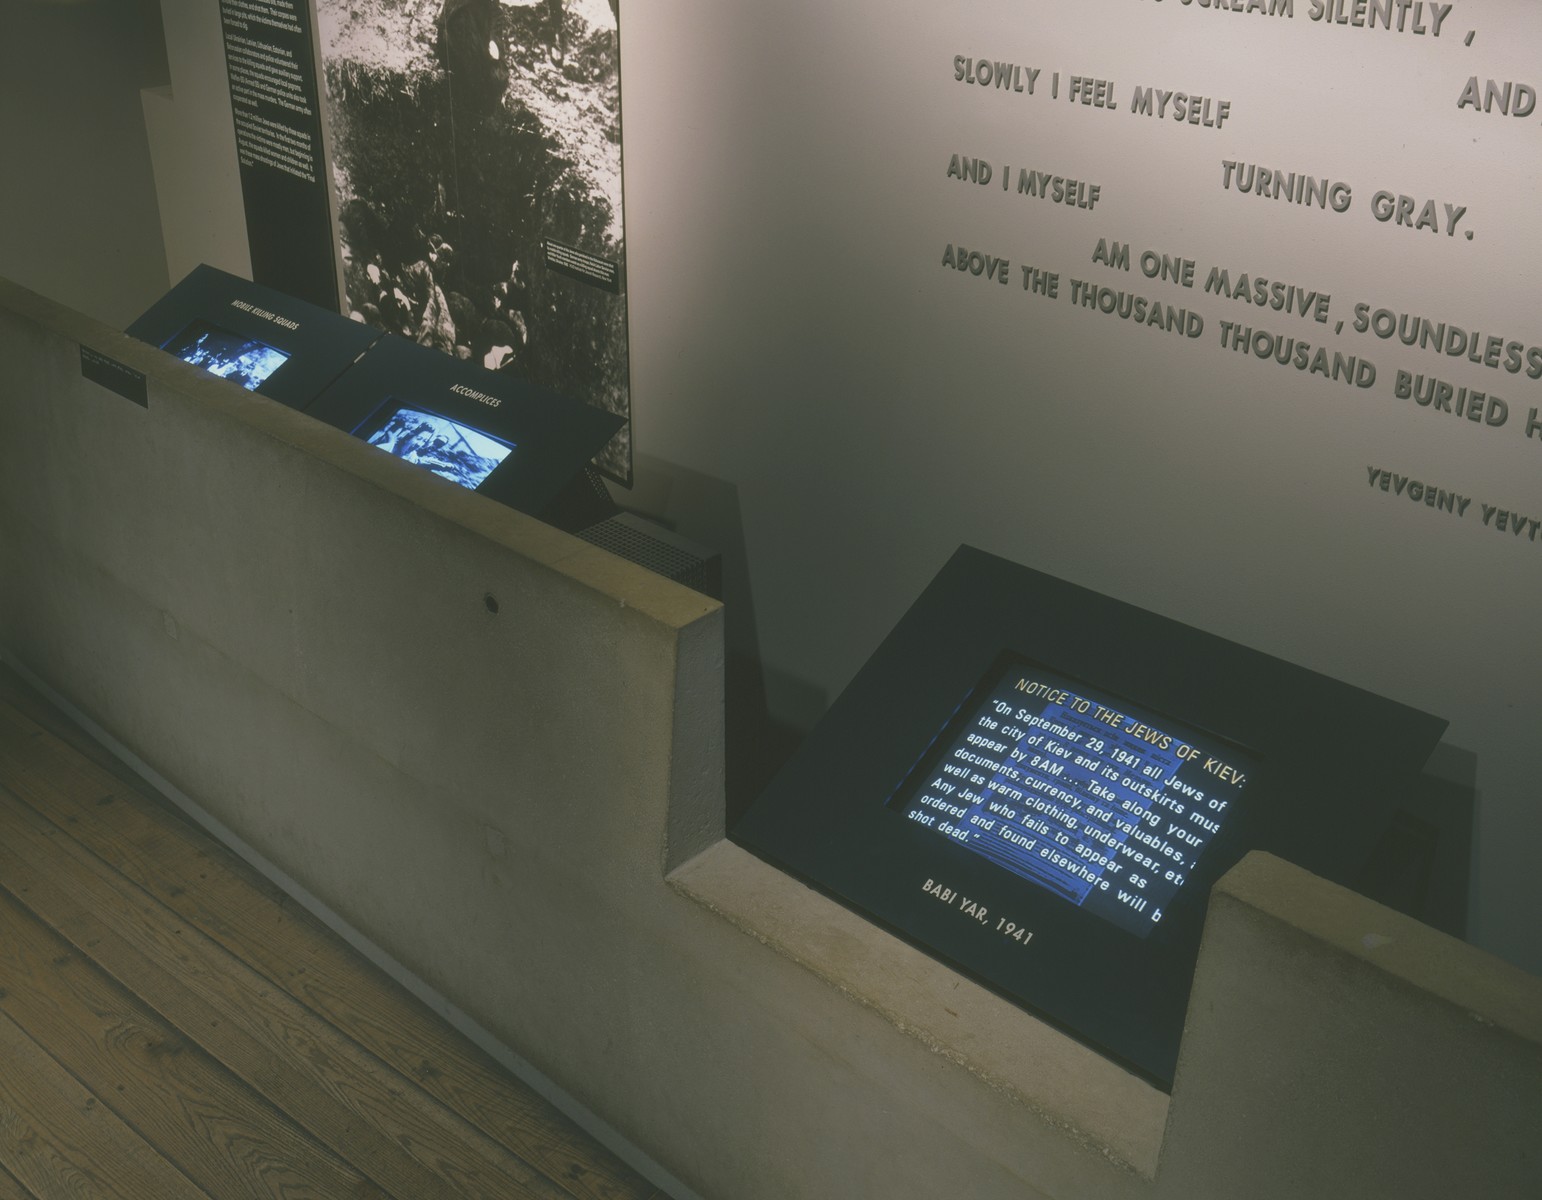 Monitors accompanying the Babi Yar and mobile killing squads segment on the third floor of the permanent exhibition at the U.S. Holocaust Memorial Museum.